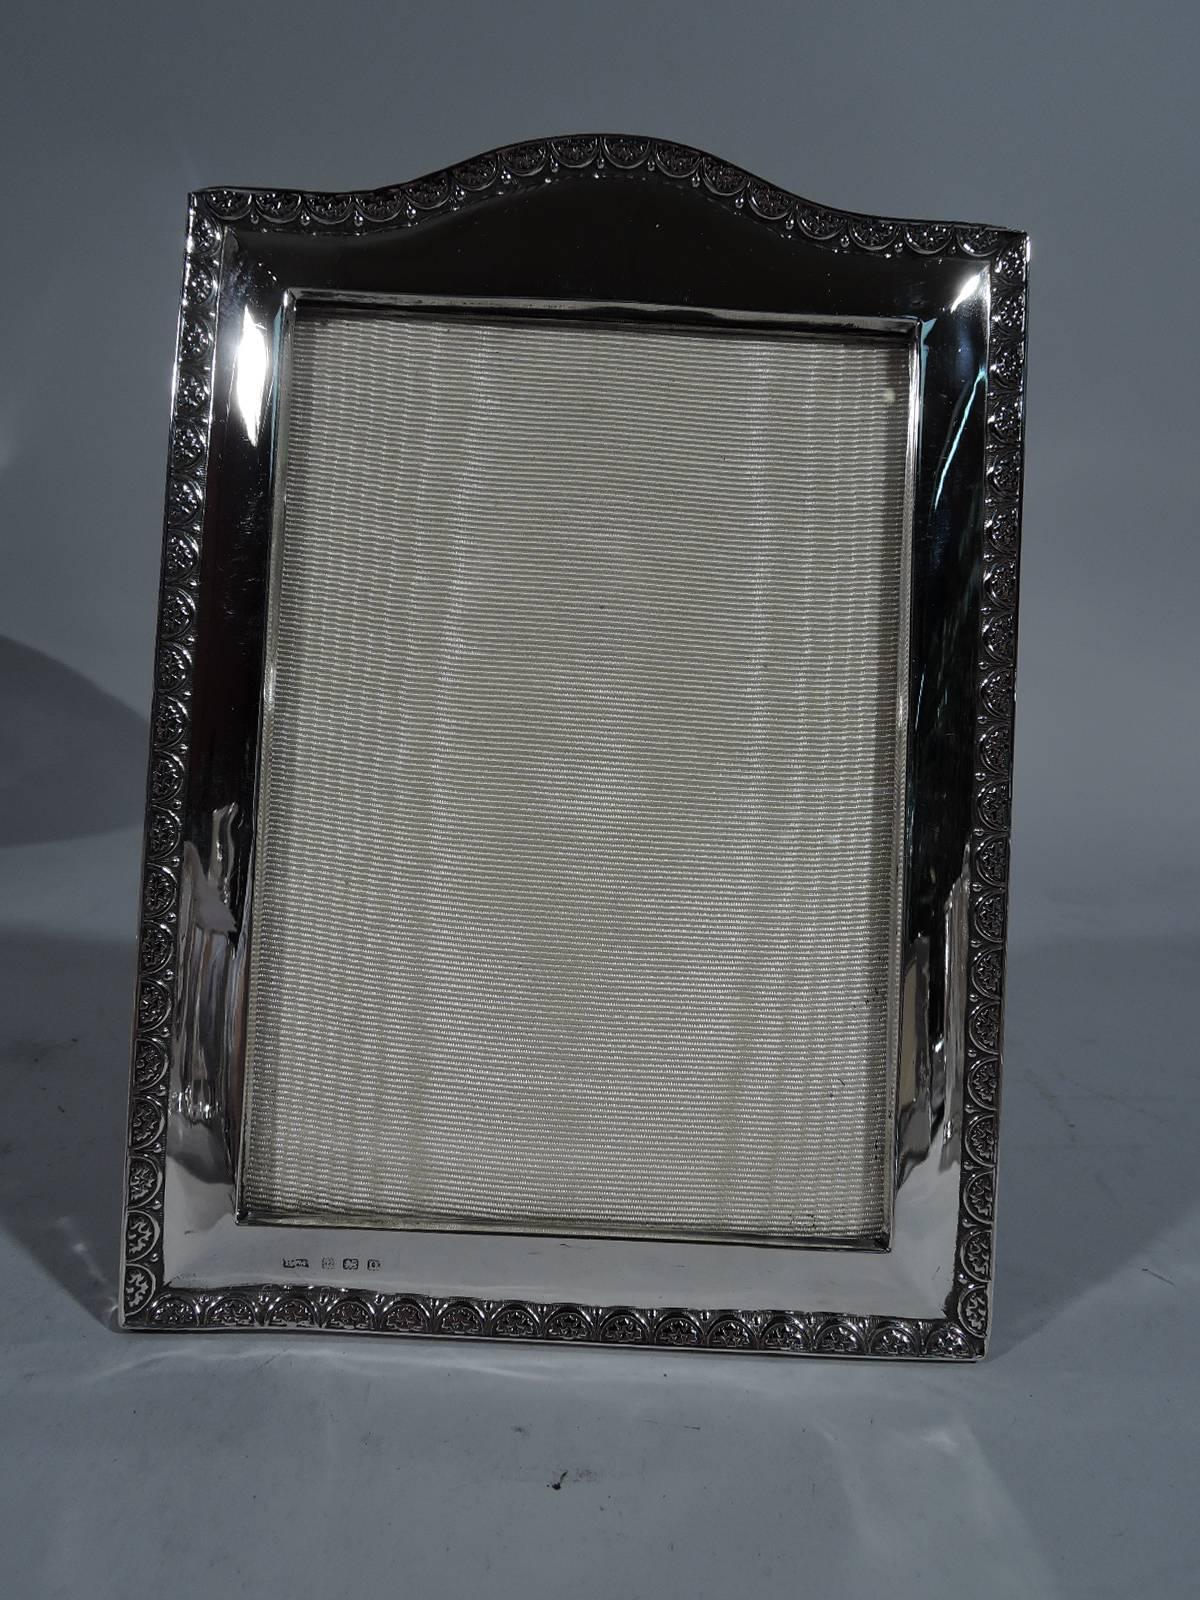 George V sterling silver picture frame. Made in Birmingham in 1913. Rectangular window with tapering border and arched top. Rim has leaf-and-dart ornament and engraved lines. With glass, silk lining, and cloth back and hinged support. Indistinct